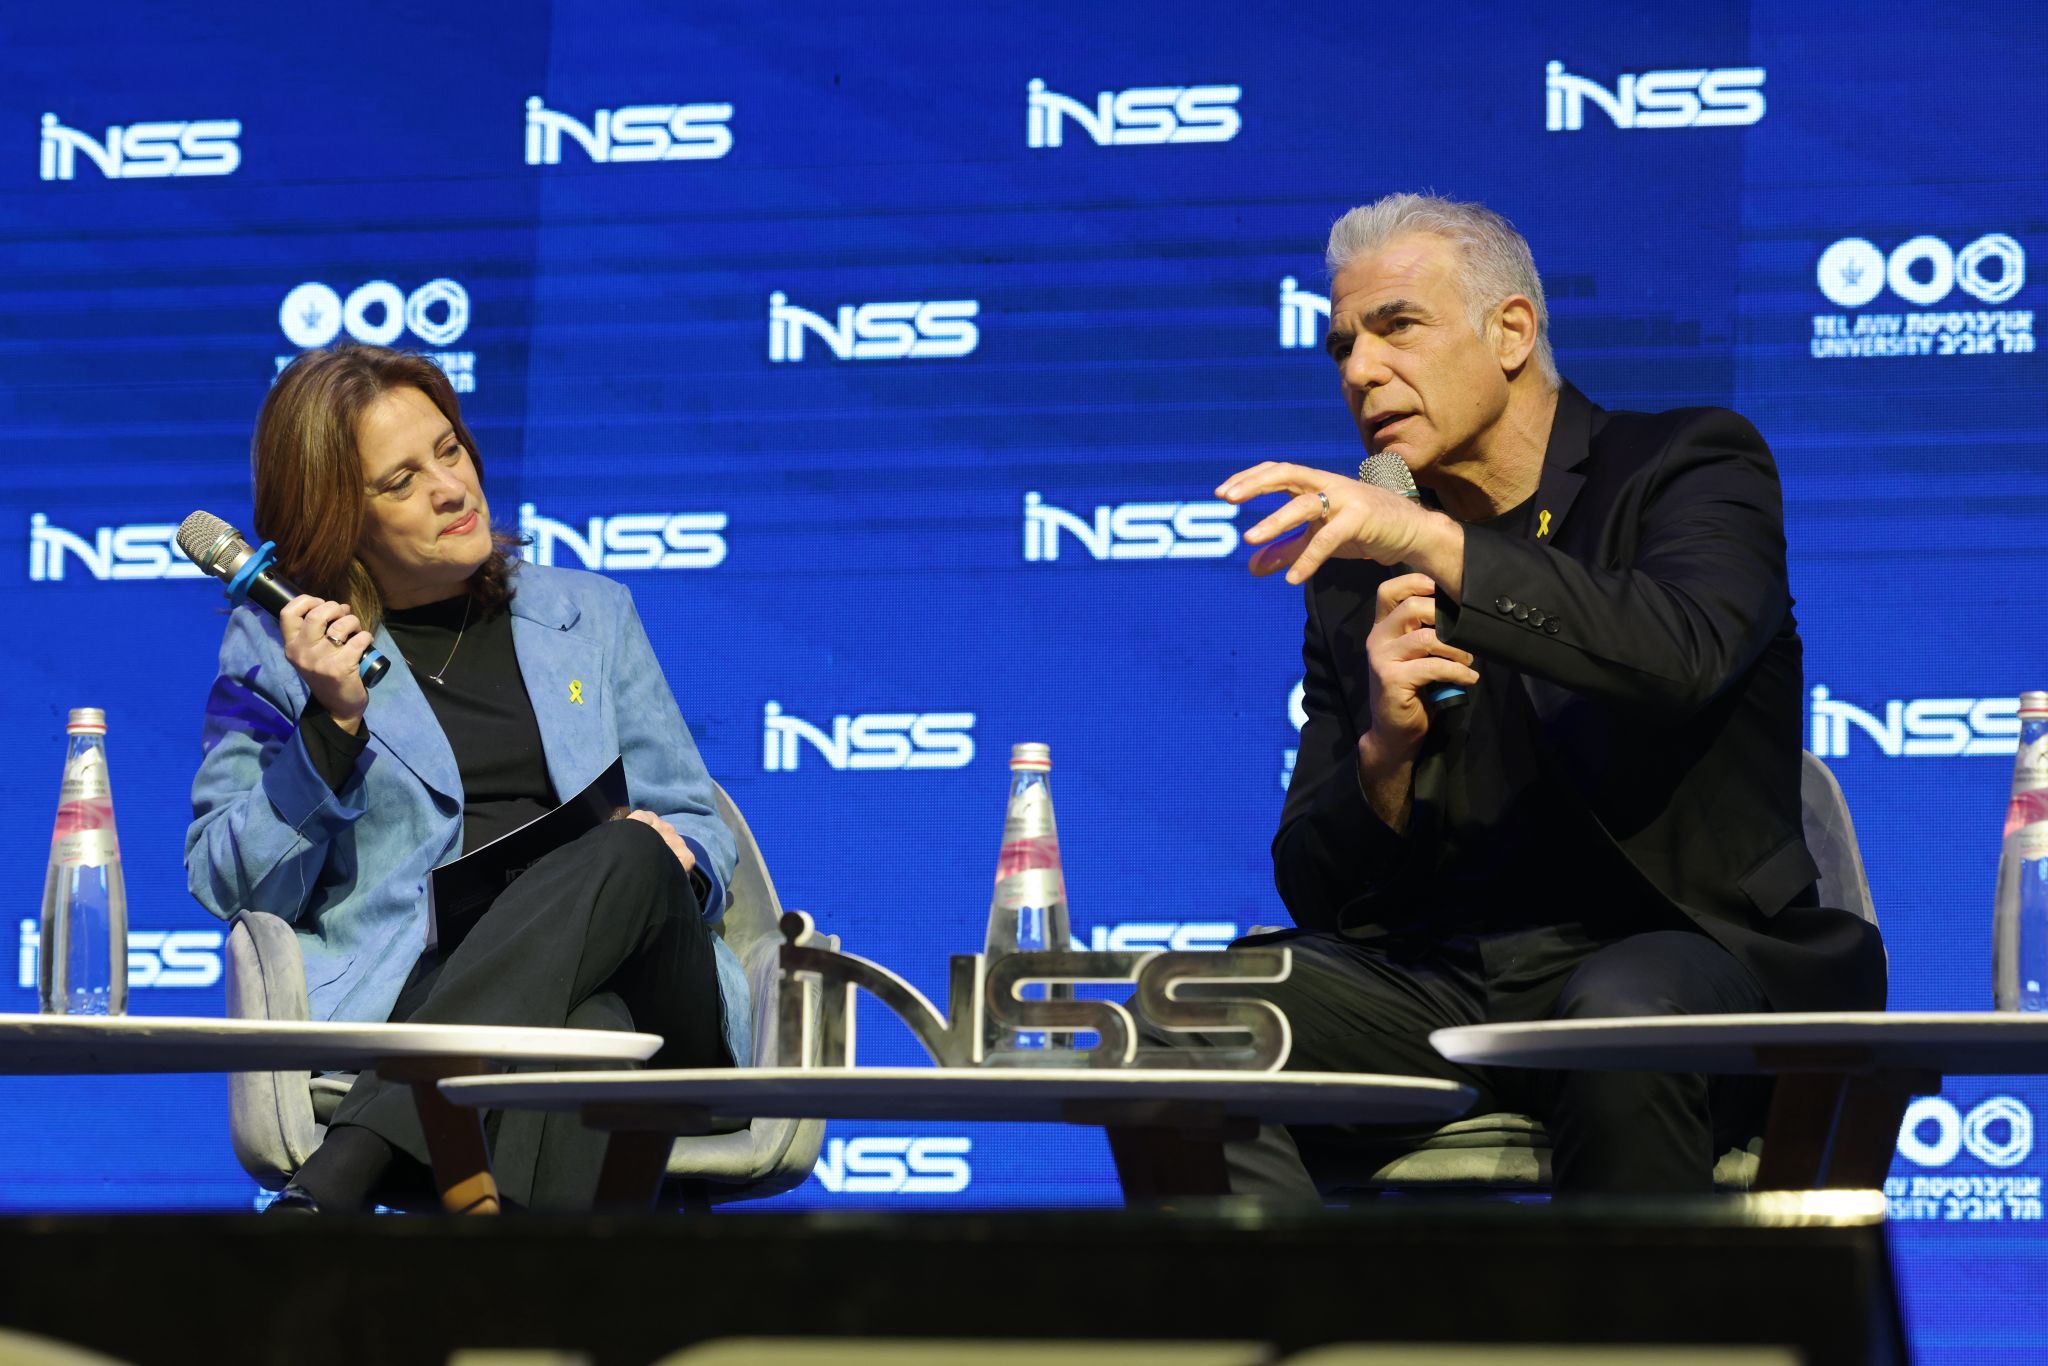 Opposition Leader Lapid at INSS: ‘Government Without Policy’ Endangers Israel’s Future